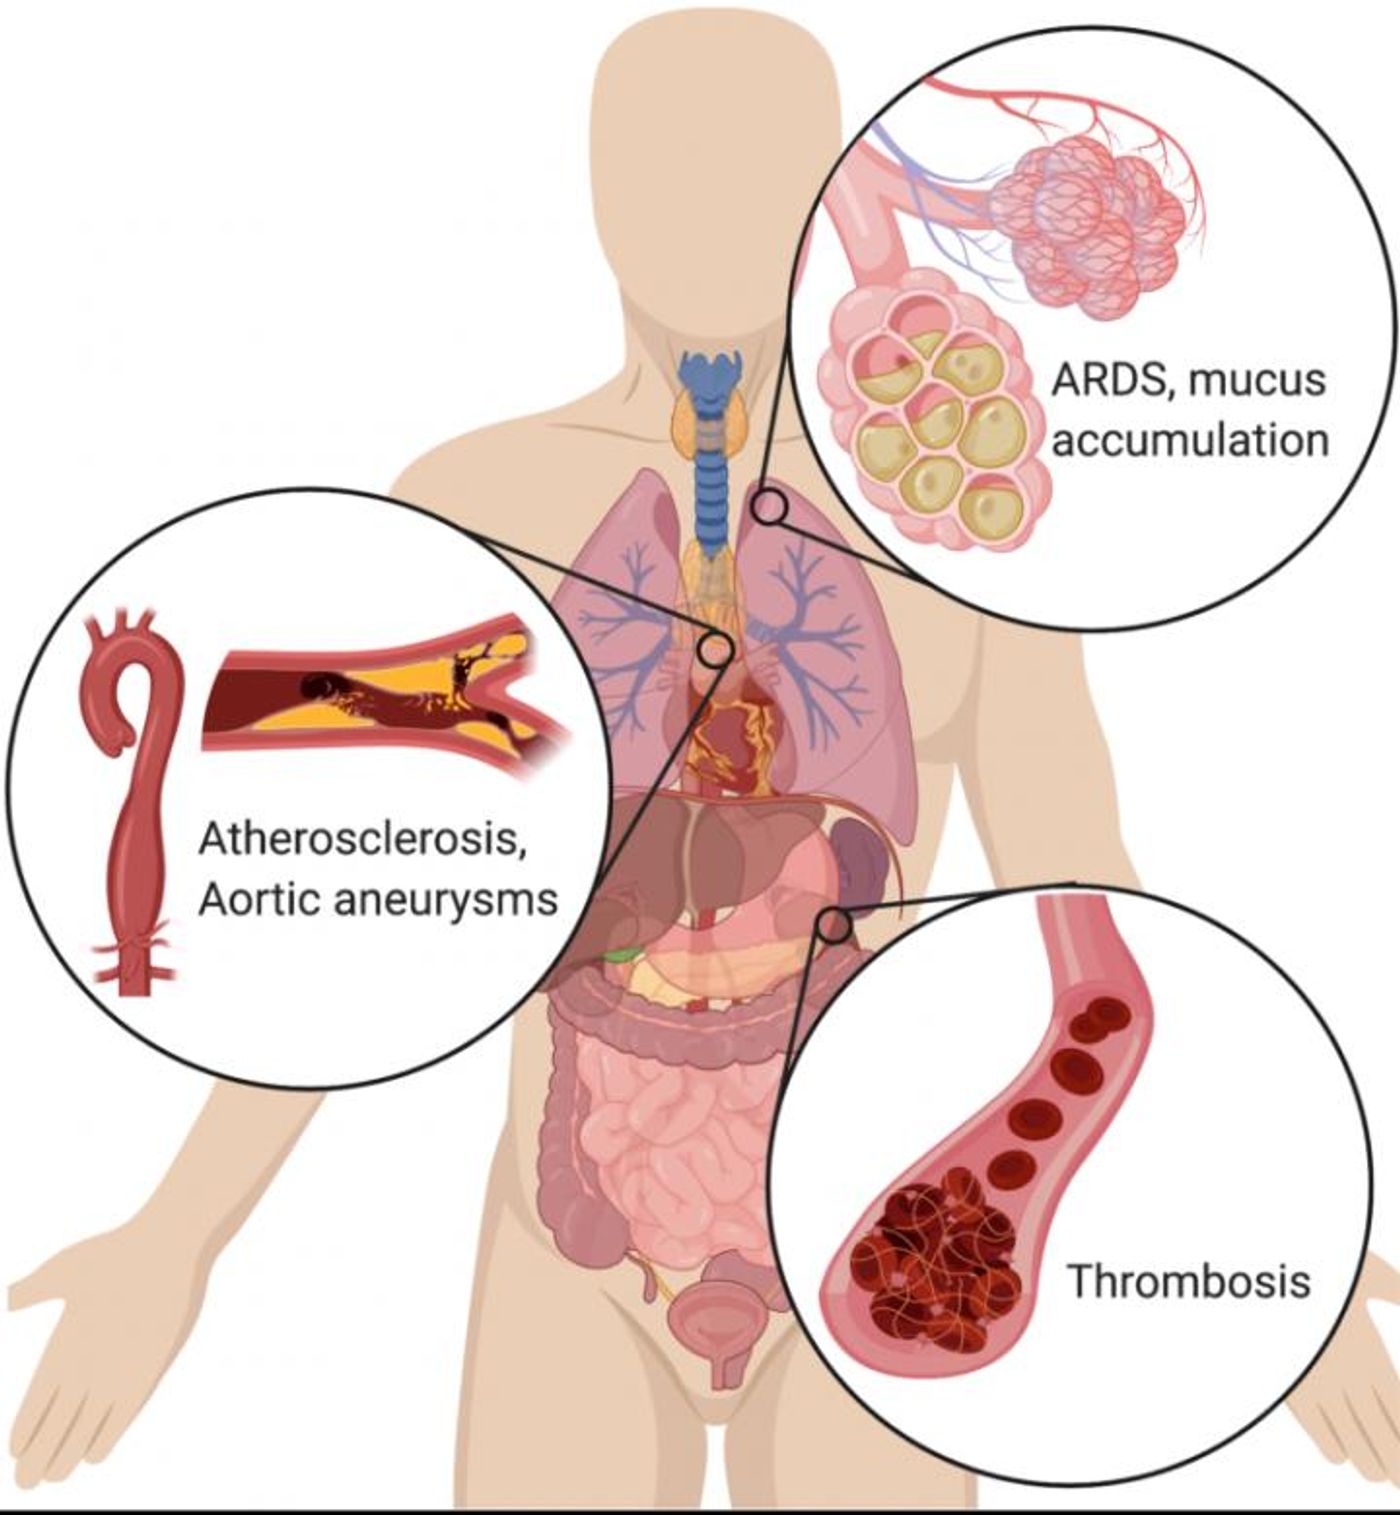 In the lungs, NETs drive the accumulation of mucus in cystic fibrosis patients' airways. NETs also drive acute respiratory distress syndrome (ARDS) after a variety of inducers, including influenza. In the vascular system, NETs drive atherosclerosis and aortic aneurysms, as well as thrombosis (particularly microthrombosis), with devastating effects on organ function. BioRender was used to generate the illustration. / Credit: CSHL